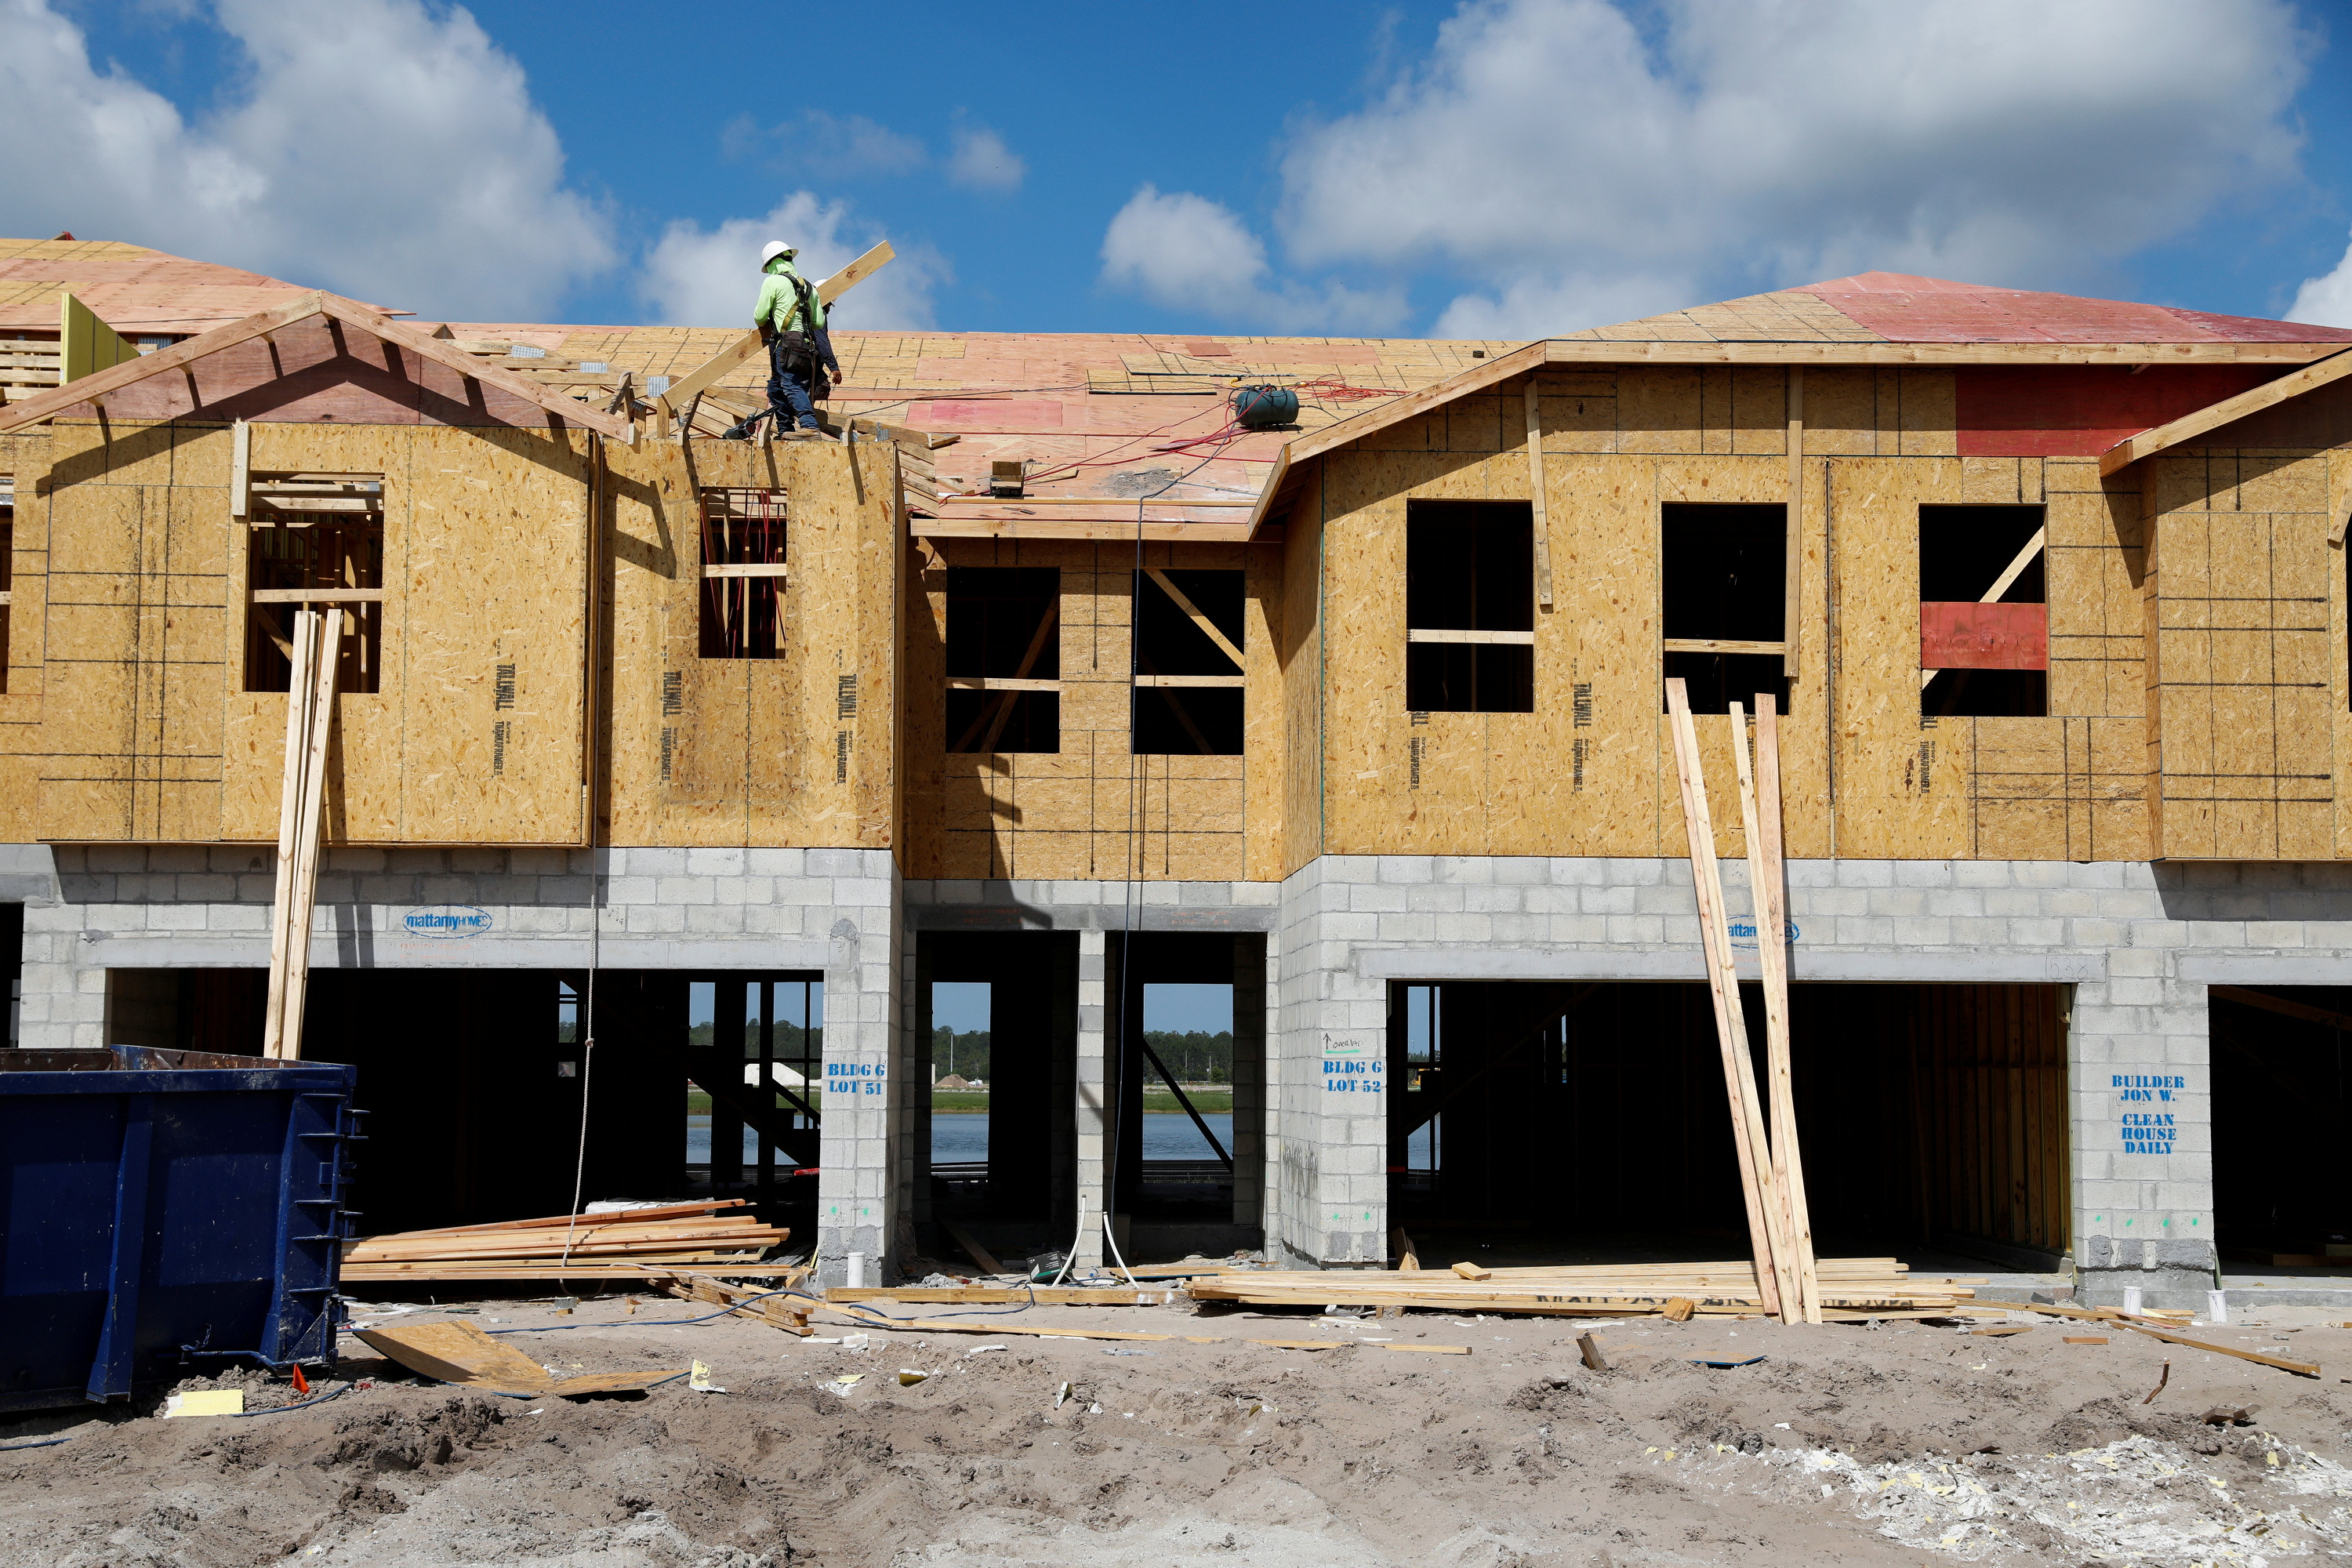 12 Must-Haves When Building a New Home in Florida in 2022